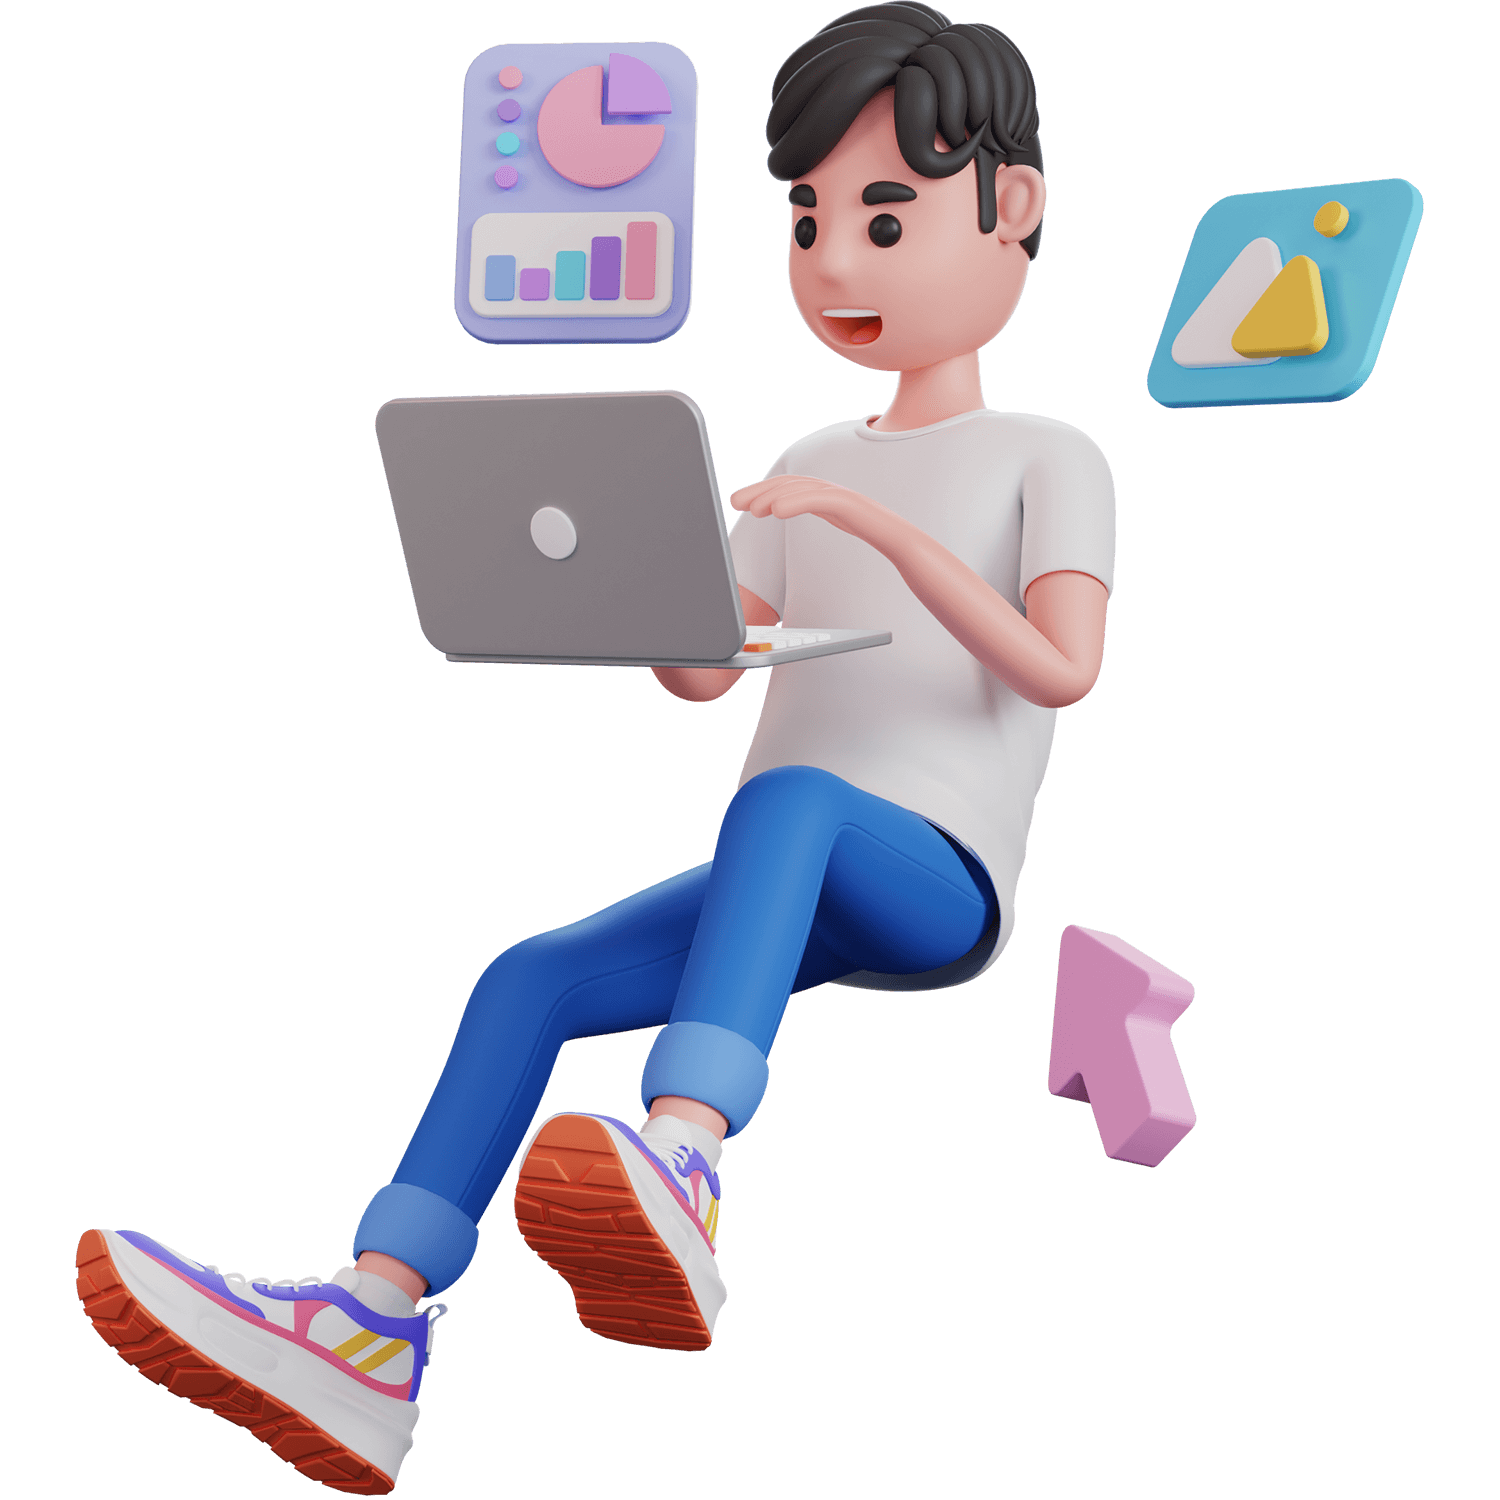 A young man sitting with a laptop, illustrations of multimedia content and graphics floating around him.